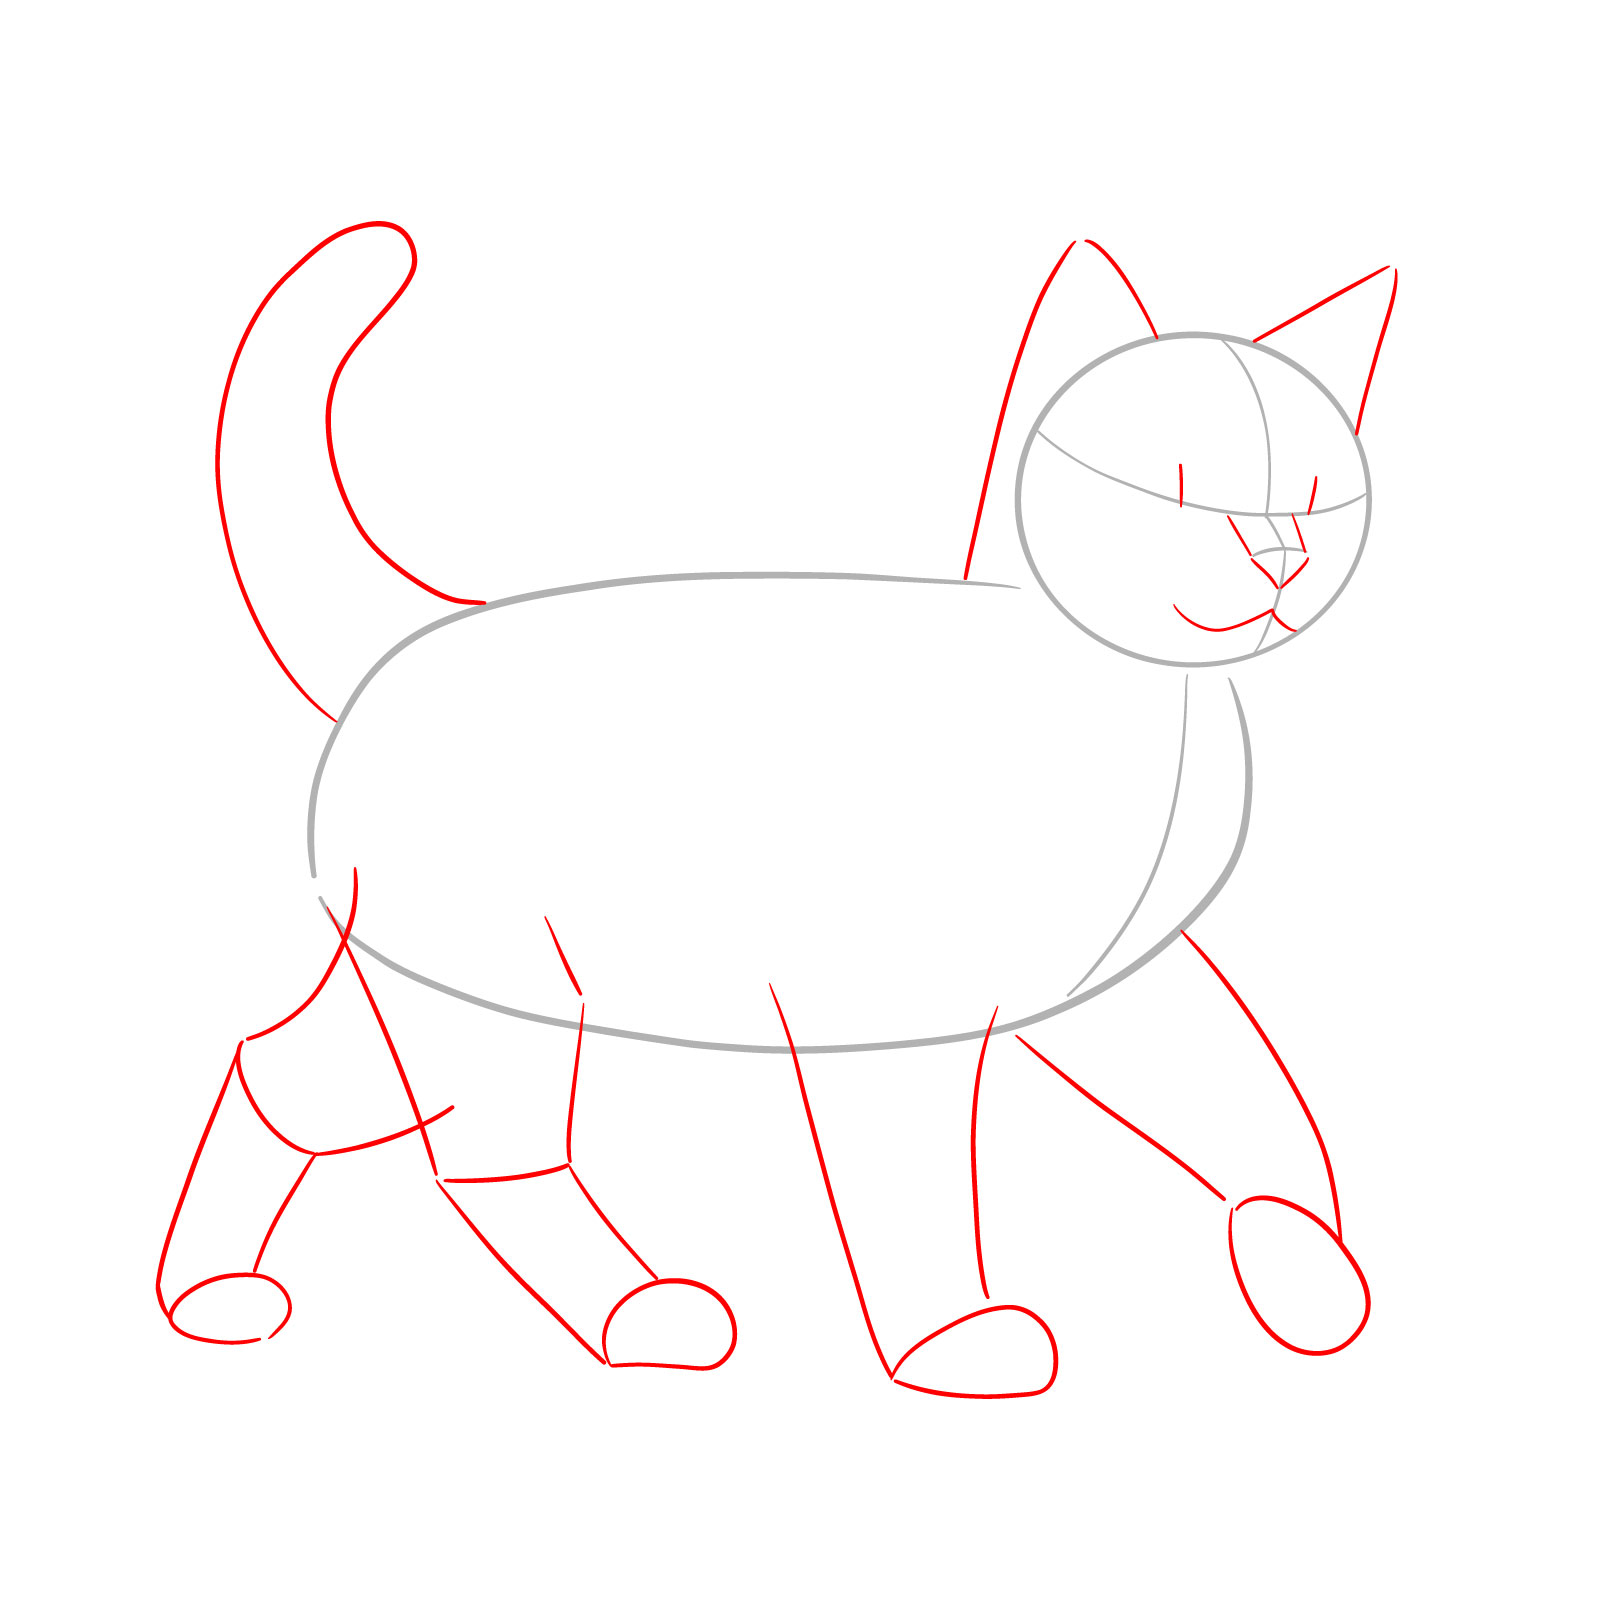 Initial mapping of the cat's facial features and limb placements for a walking cat - step 02